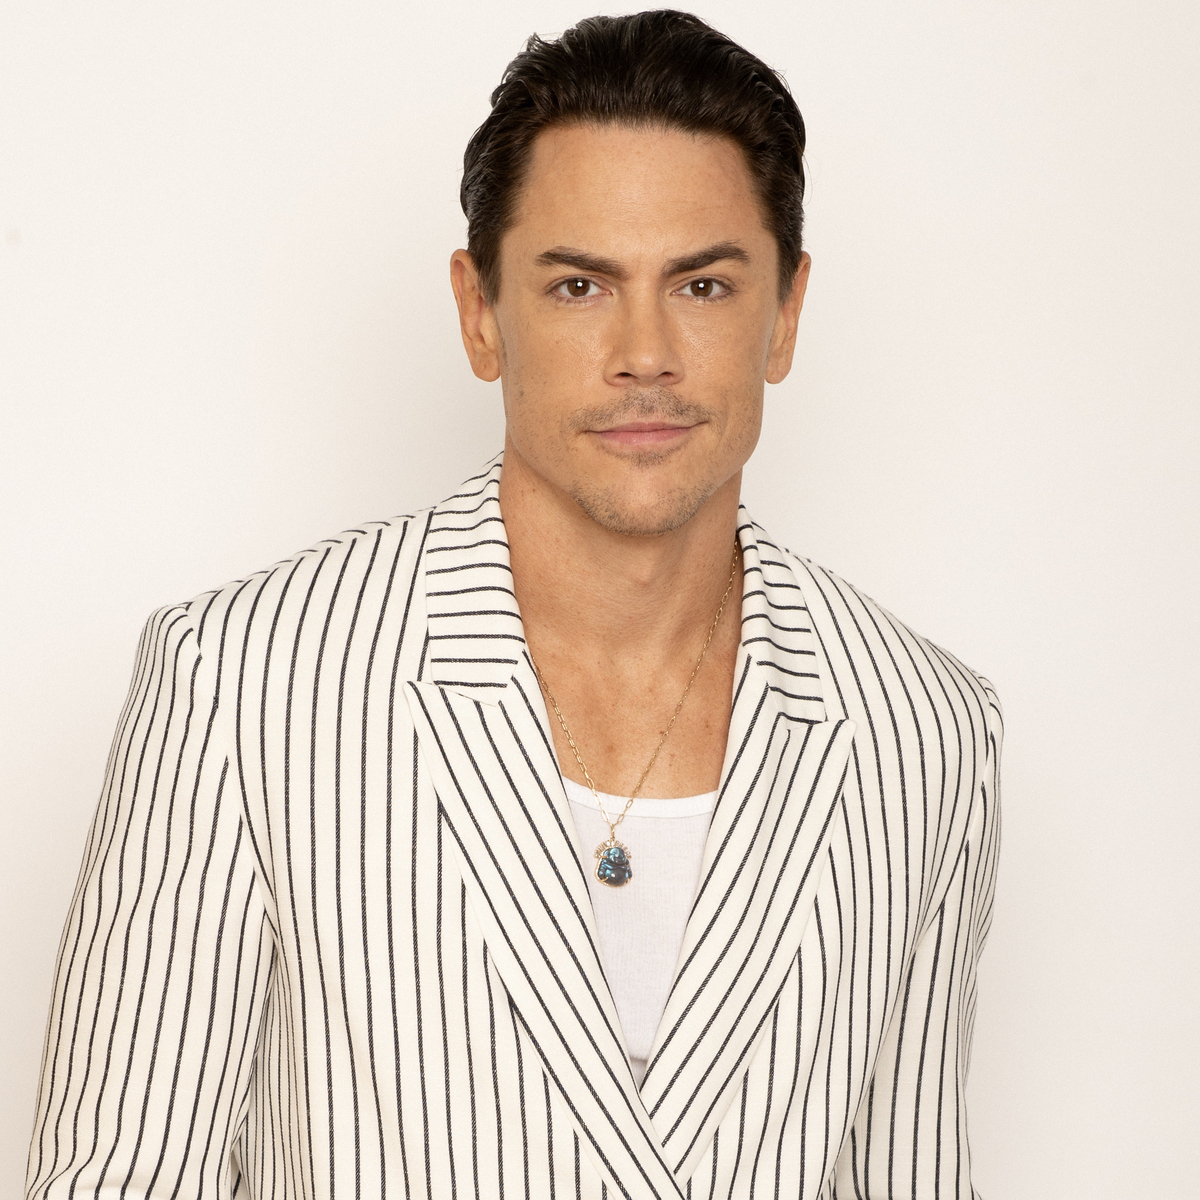 Tom Sandoval Apologizes for O.J. Simpson and George Floyd Comparisons